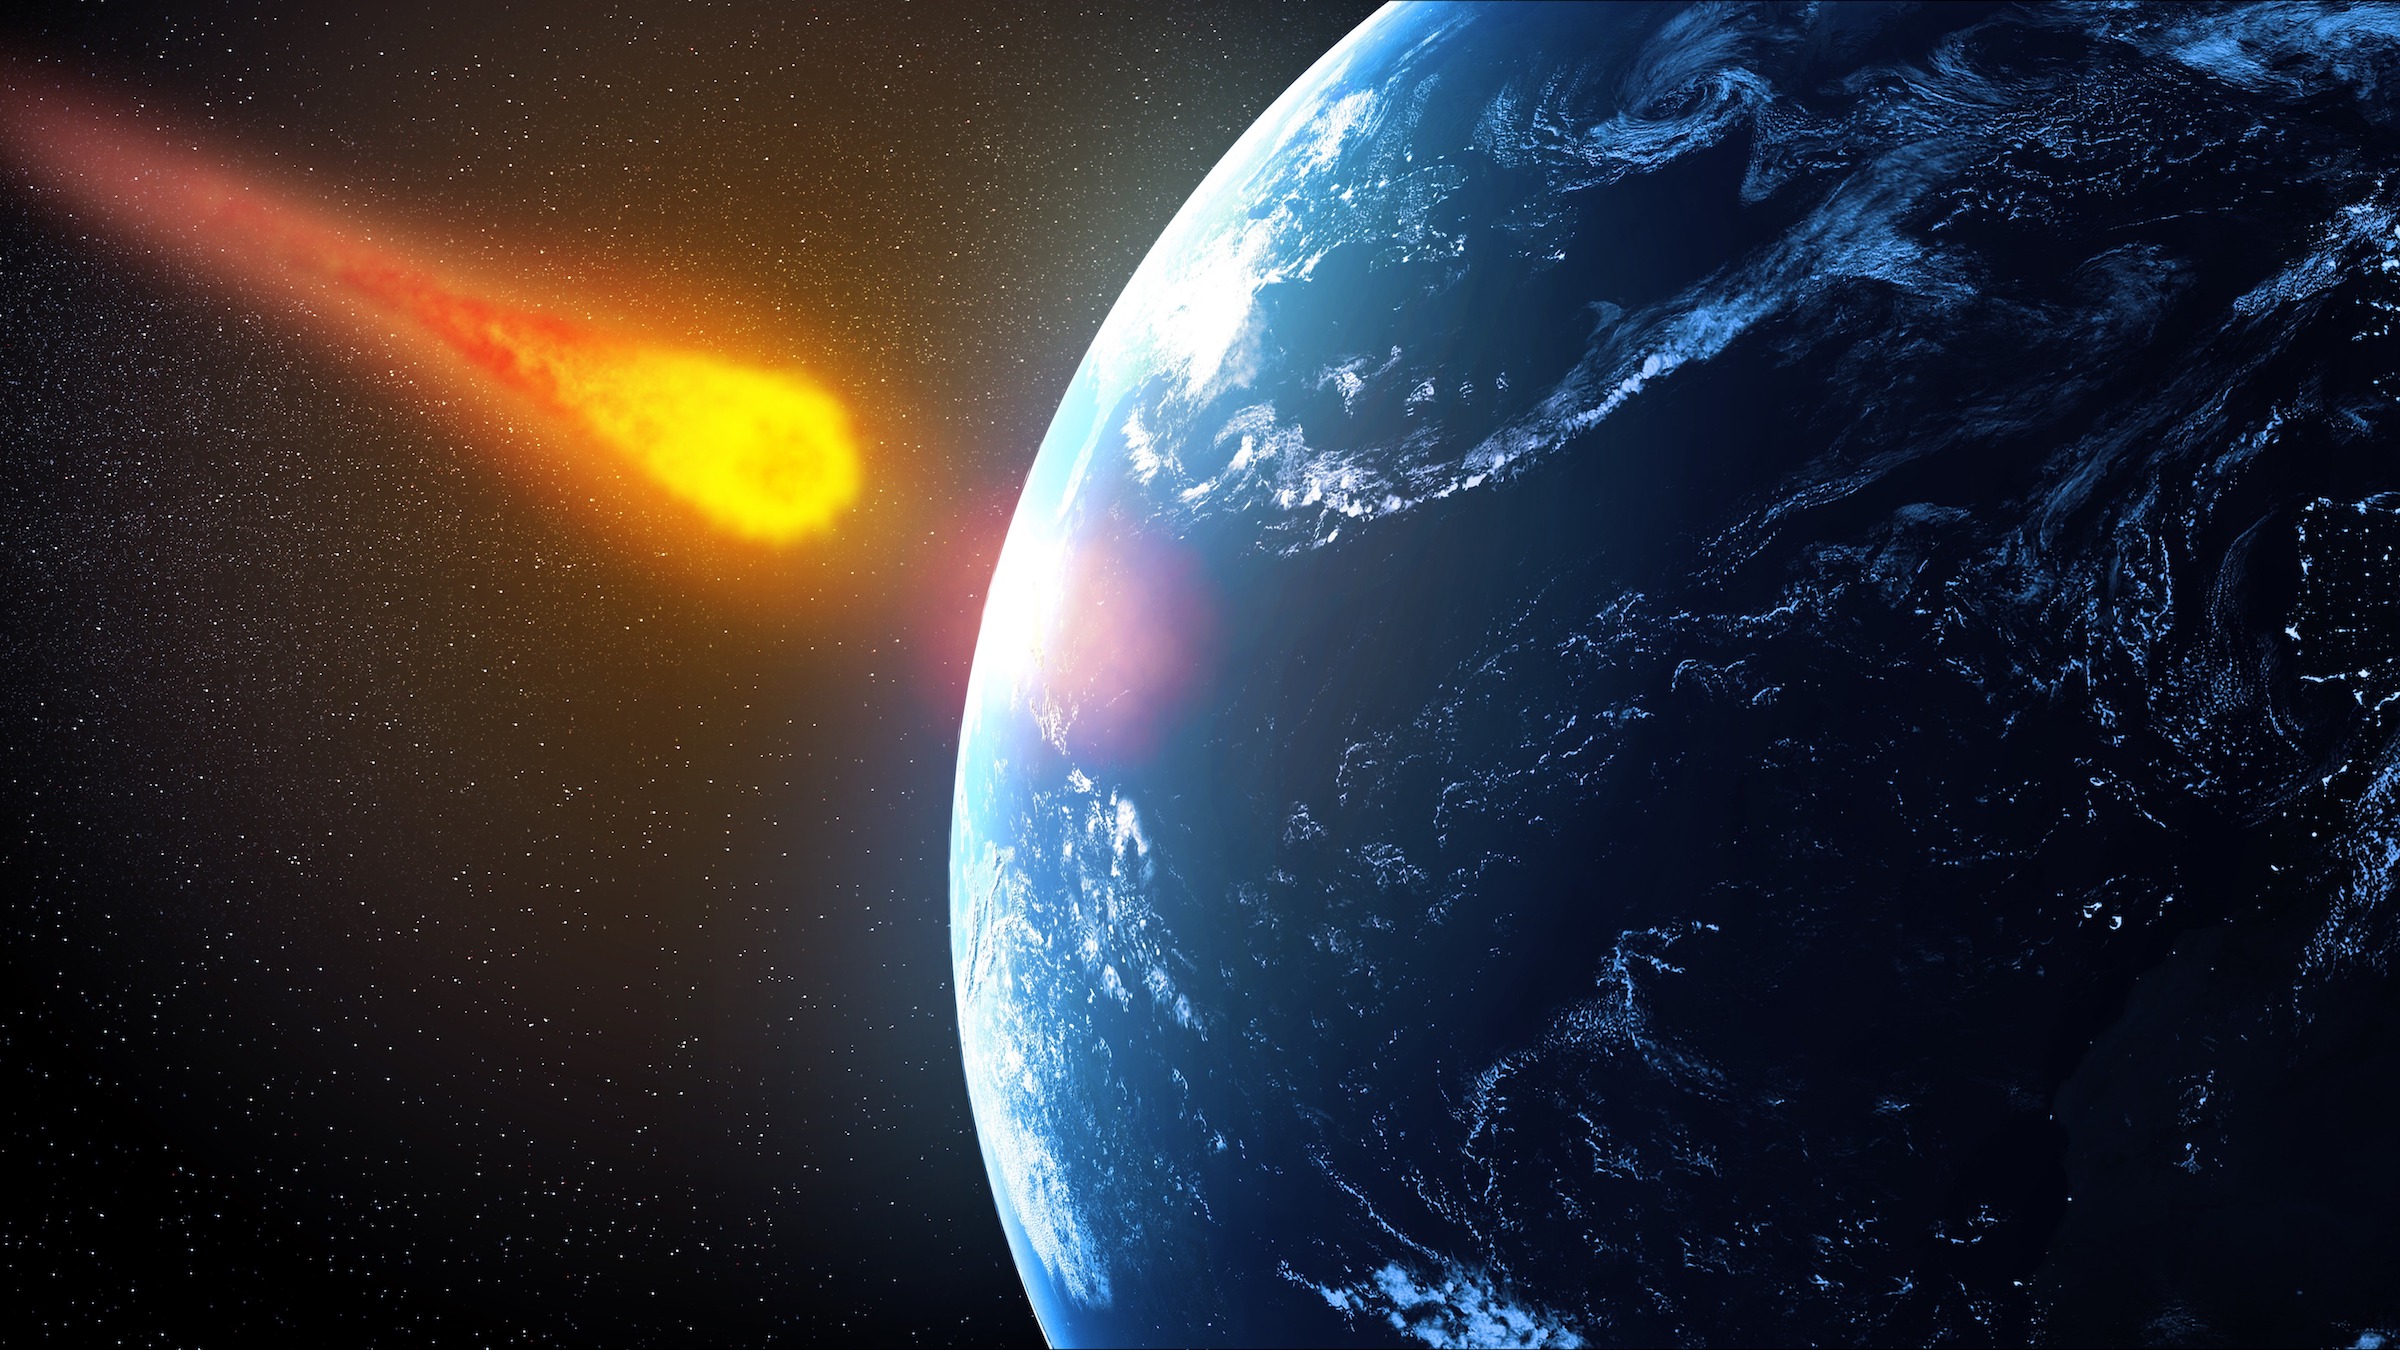 Illustration of an asteroid hitting the Earth